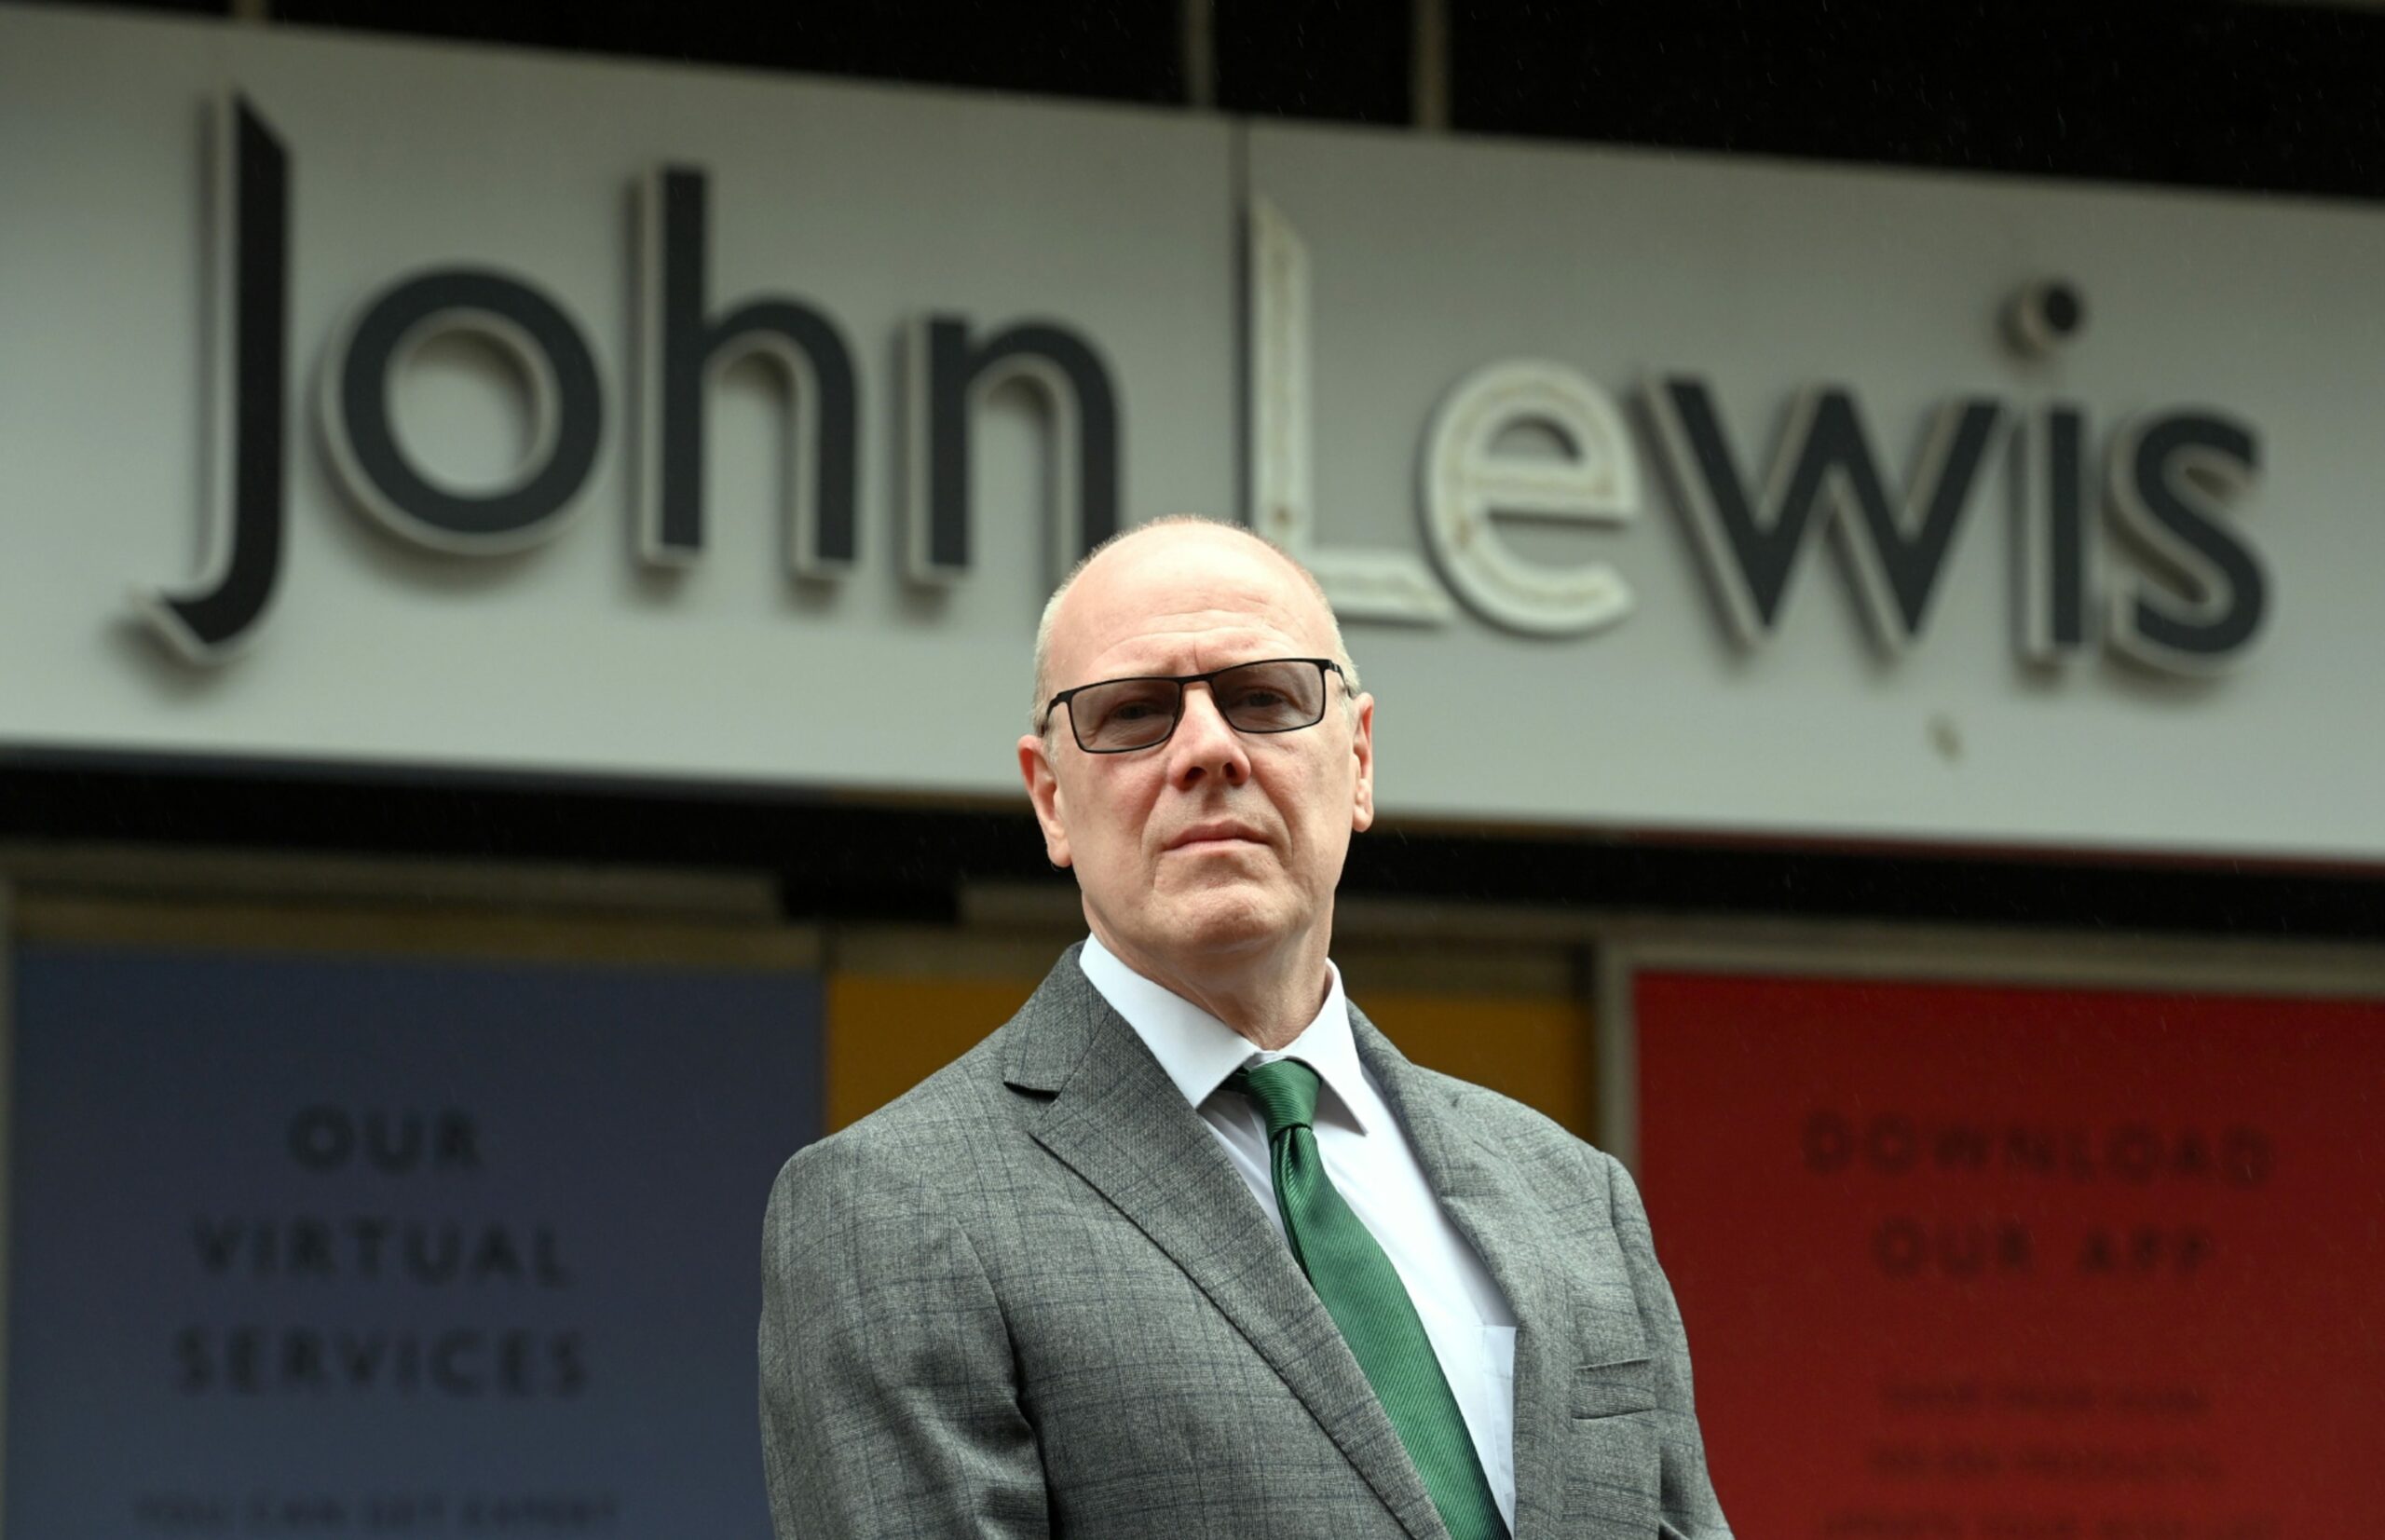 SNP Aberdeen Central MSP Kevin Stewart has renewed calls for John Lewis to gift their empty premises to the city of Aberdeen. Image: Kami Thomson/DC Thomson.